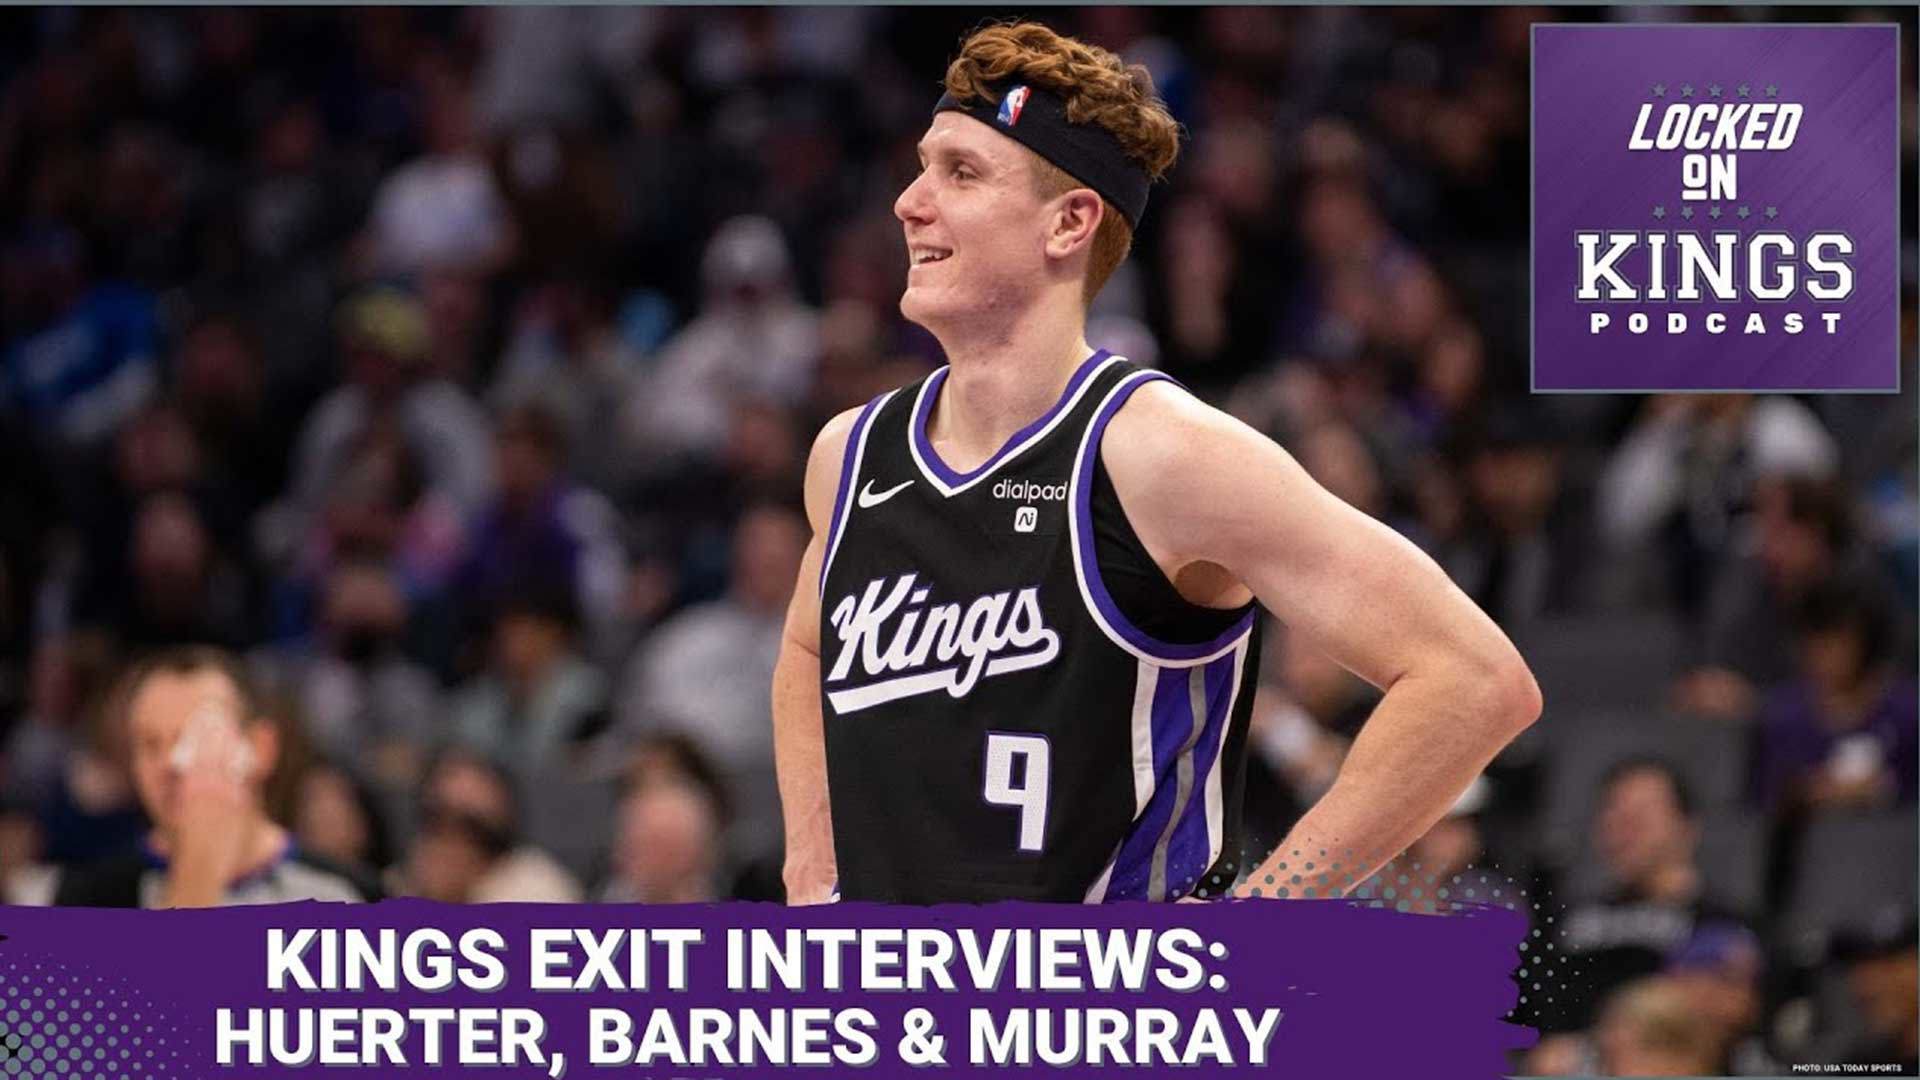 Hear from Kevin Huerter, Harrison Barnes & Keegan Murray from their end-of-season press conferences.